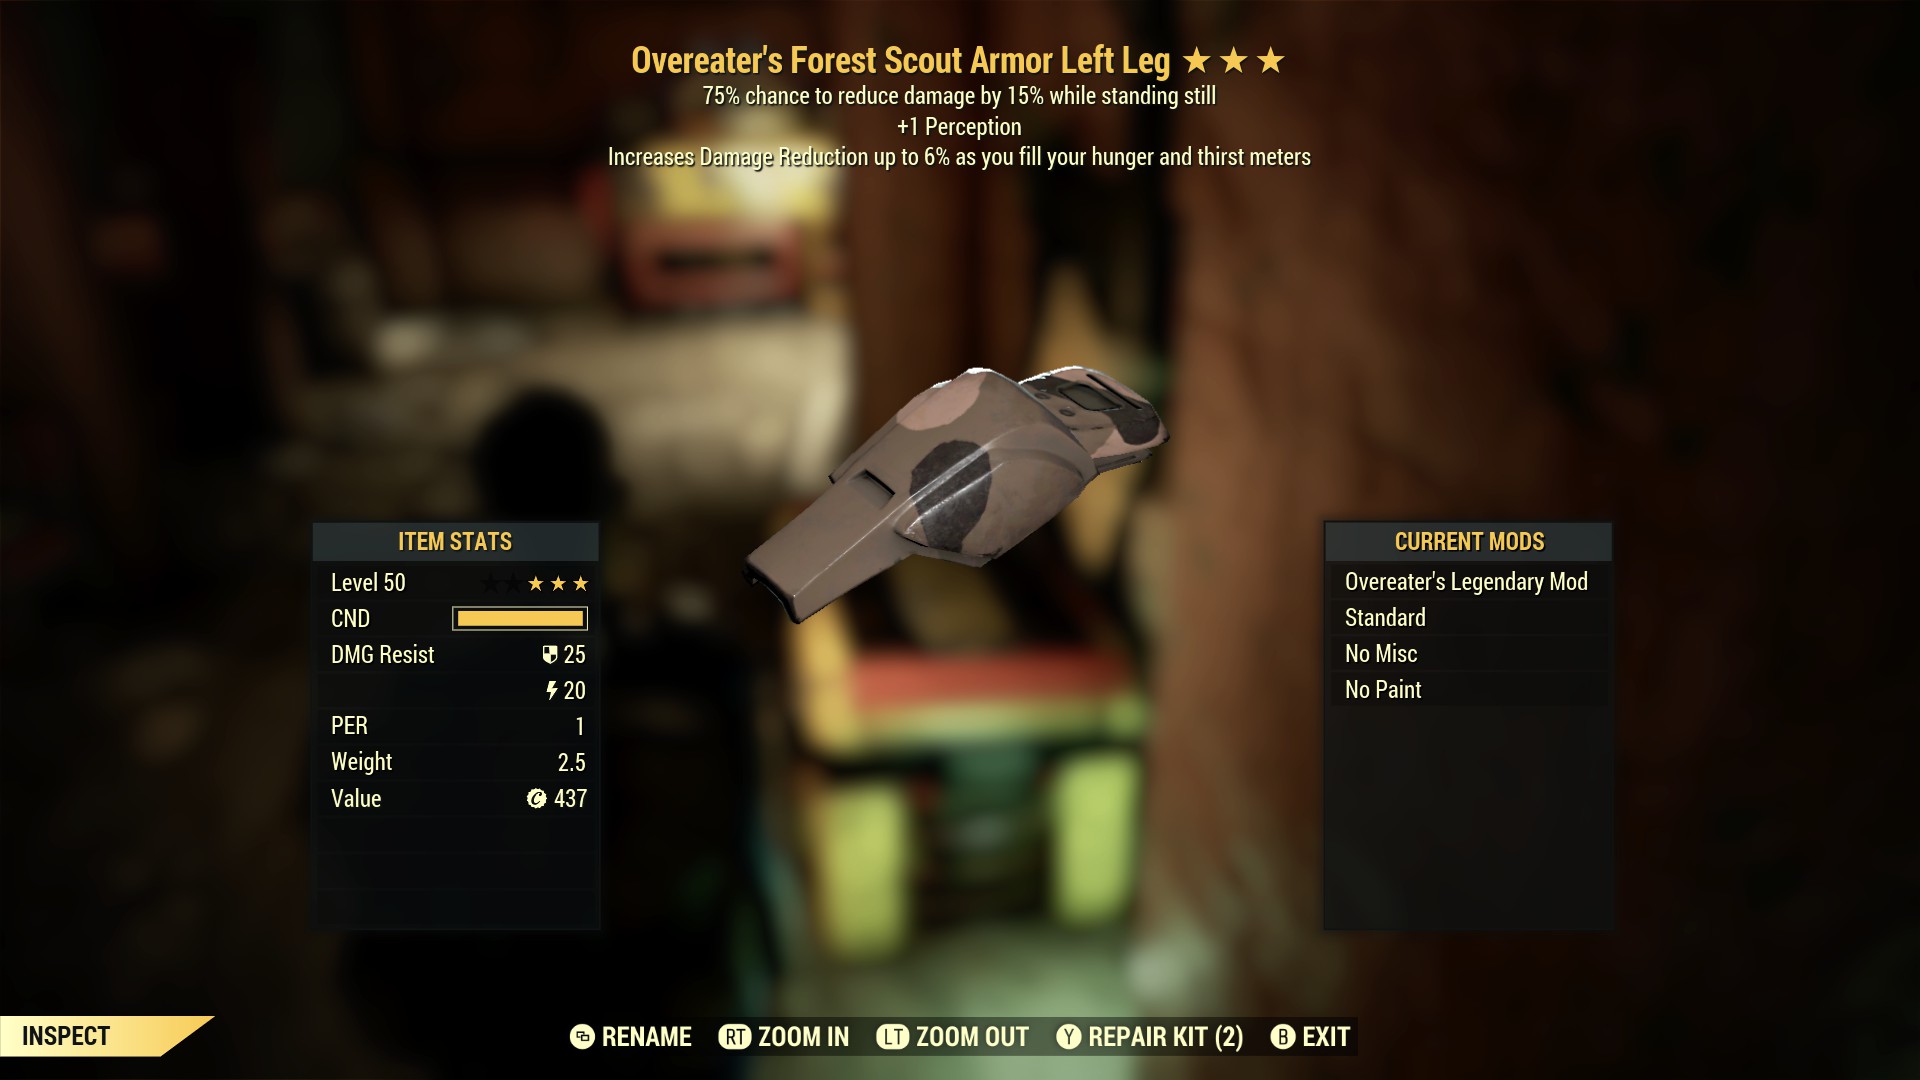 Overeater's Forest Scout Armor Left Leg